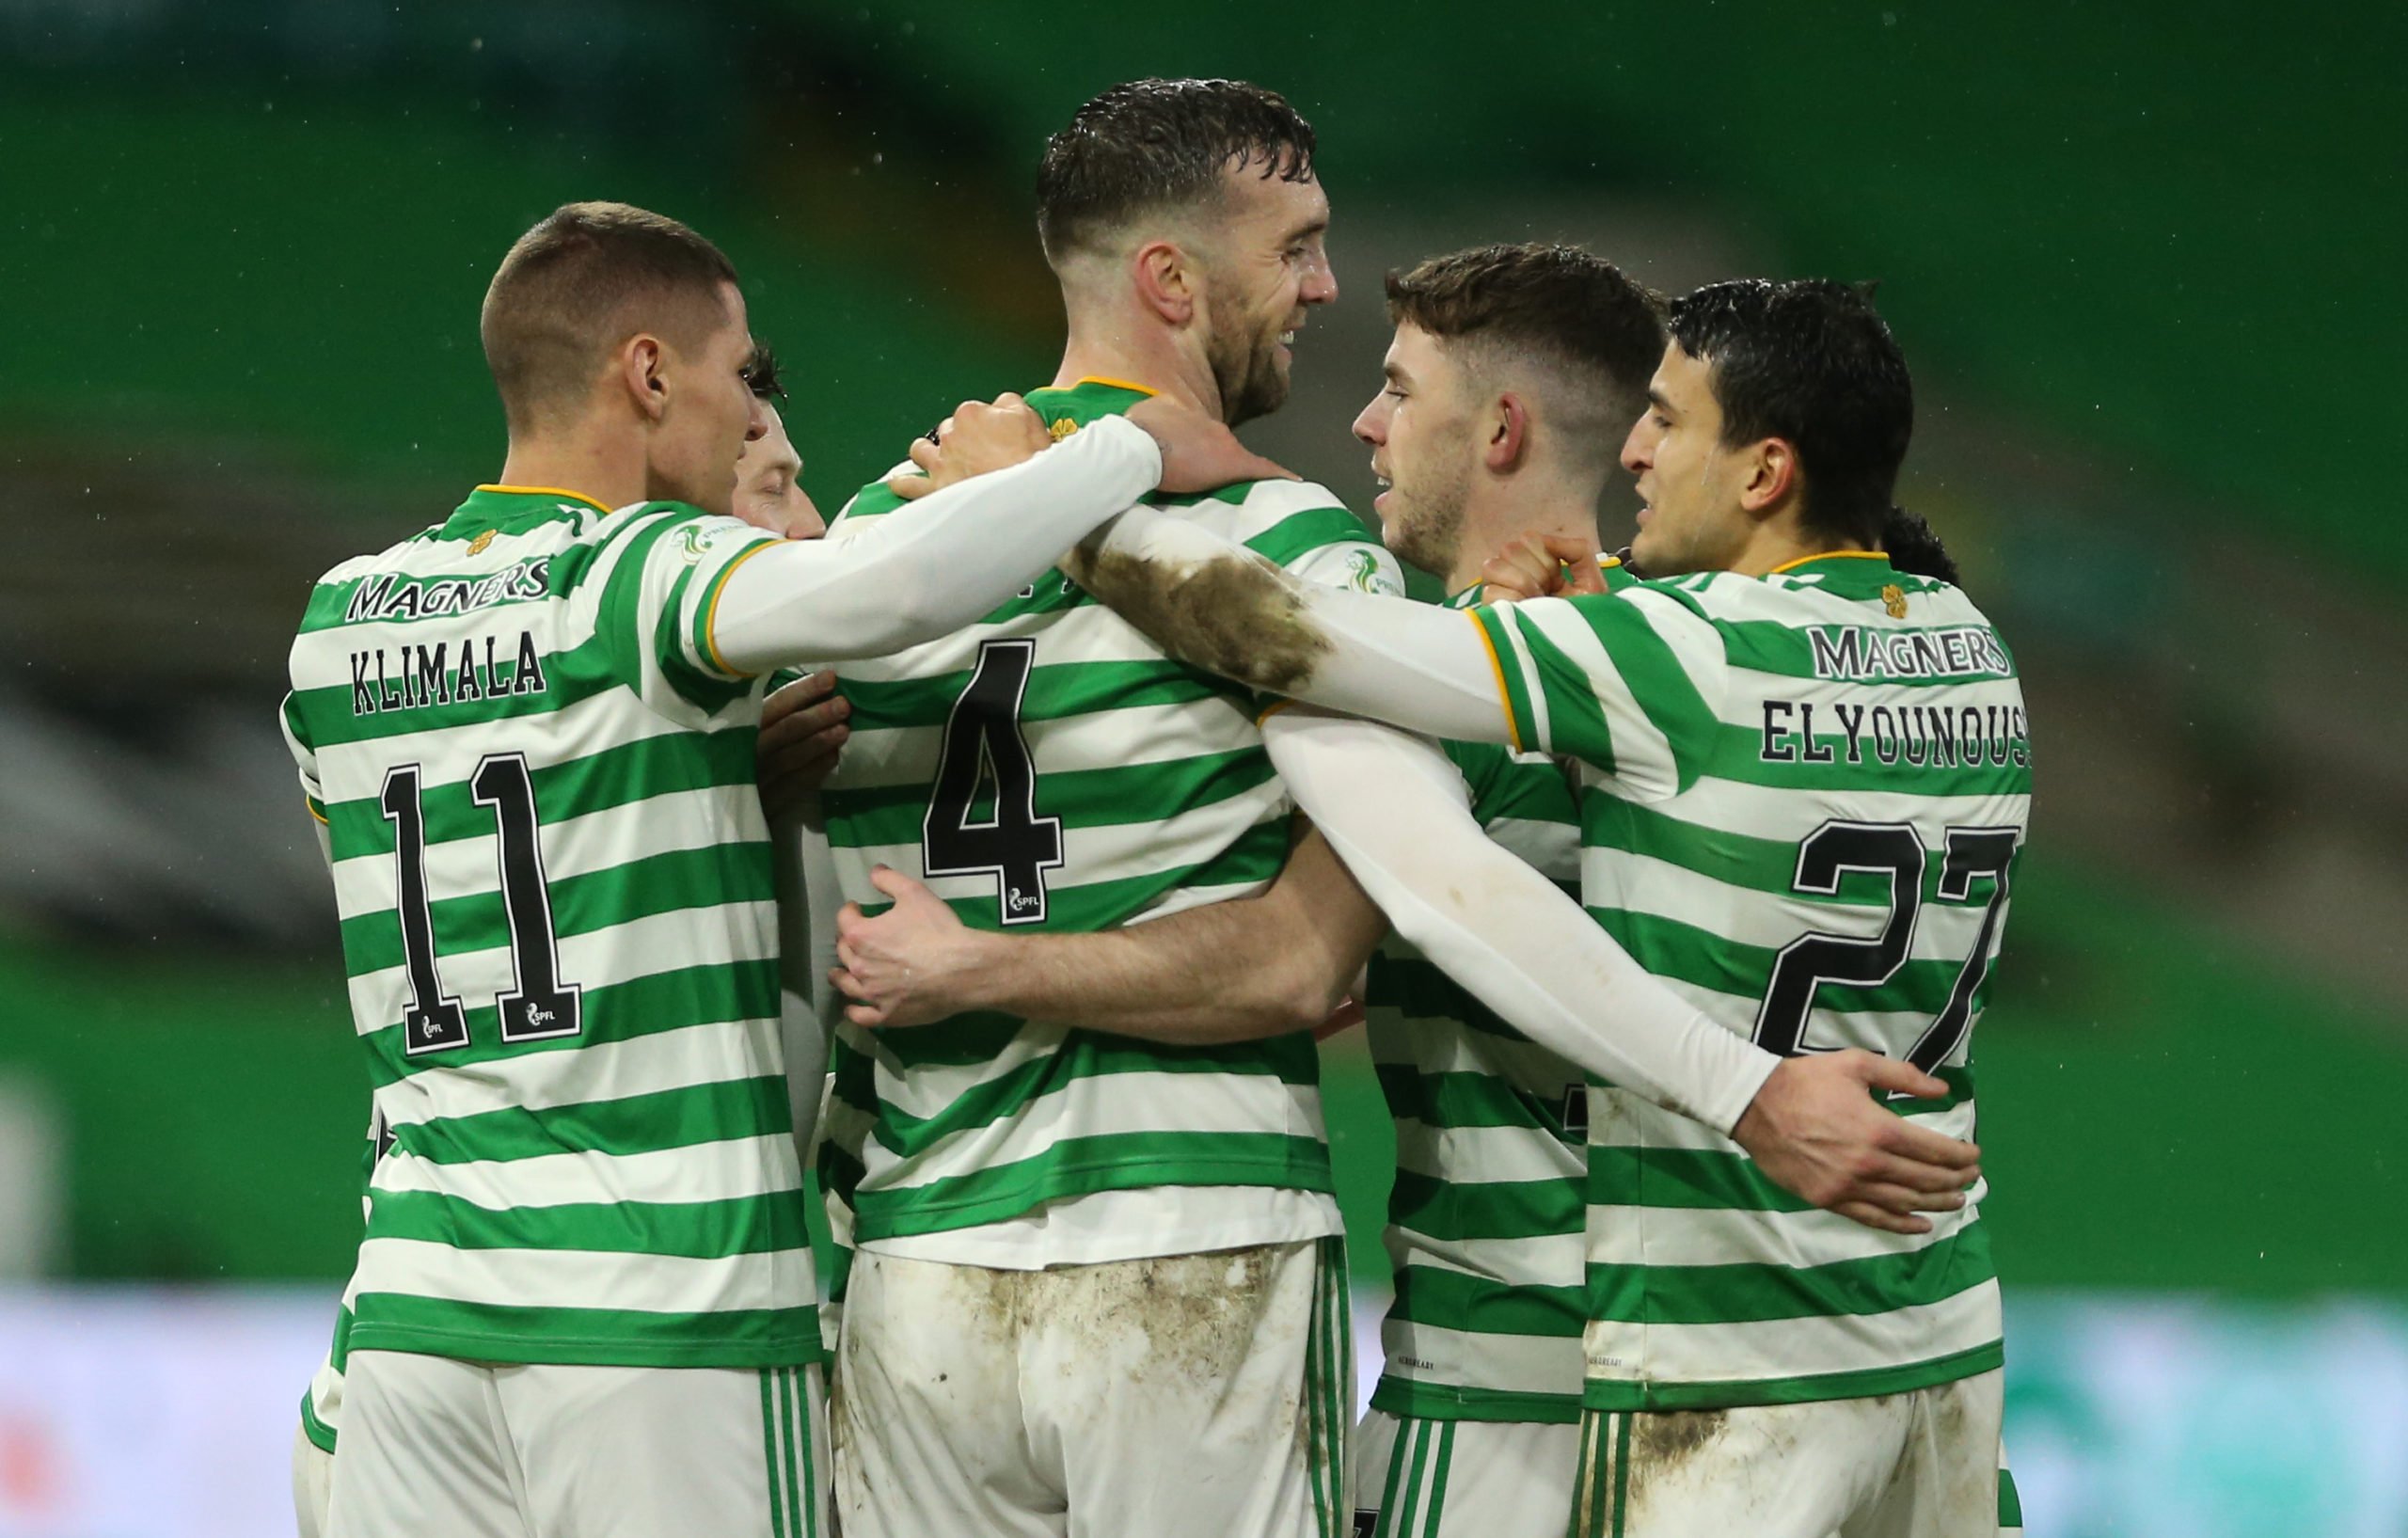 Celtic great Pat Bonner extremely satisfied with Duffy's dominance of Kilmarnock today